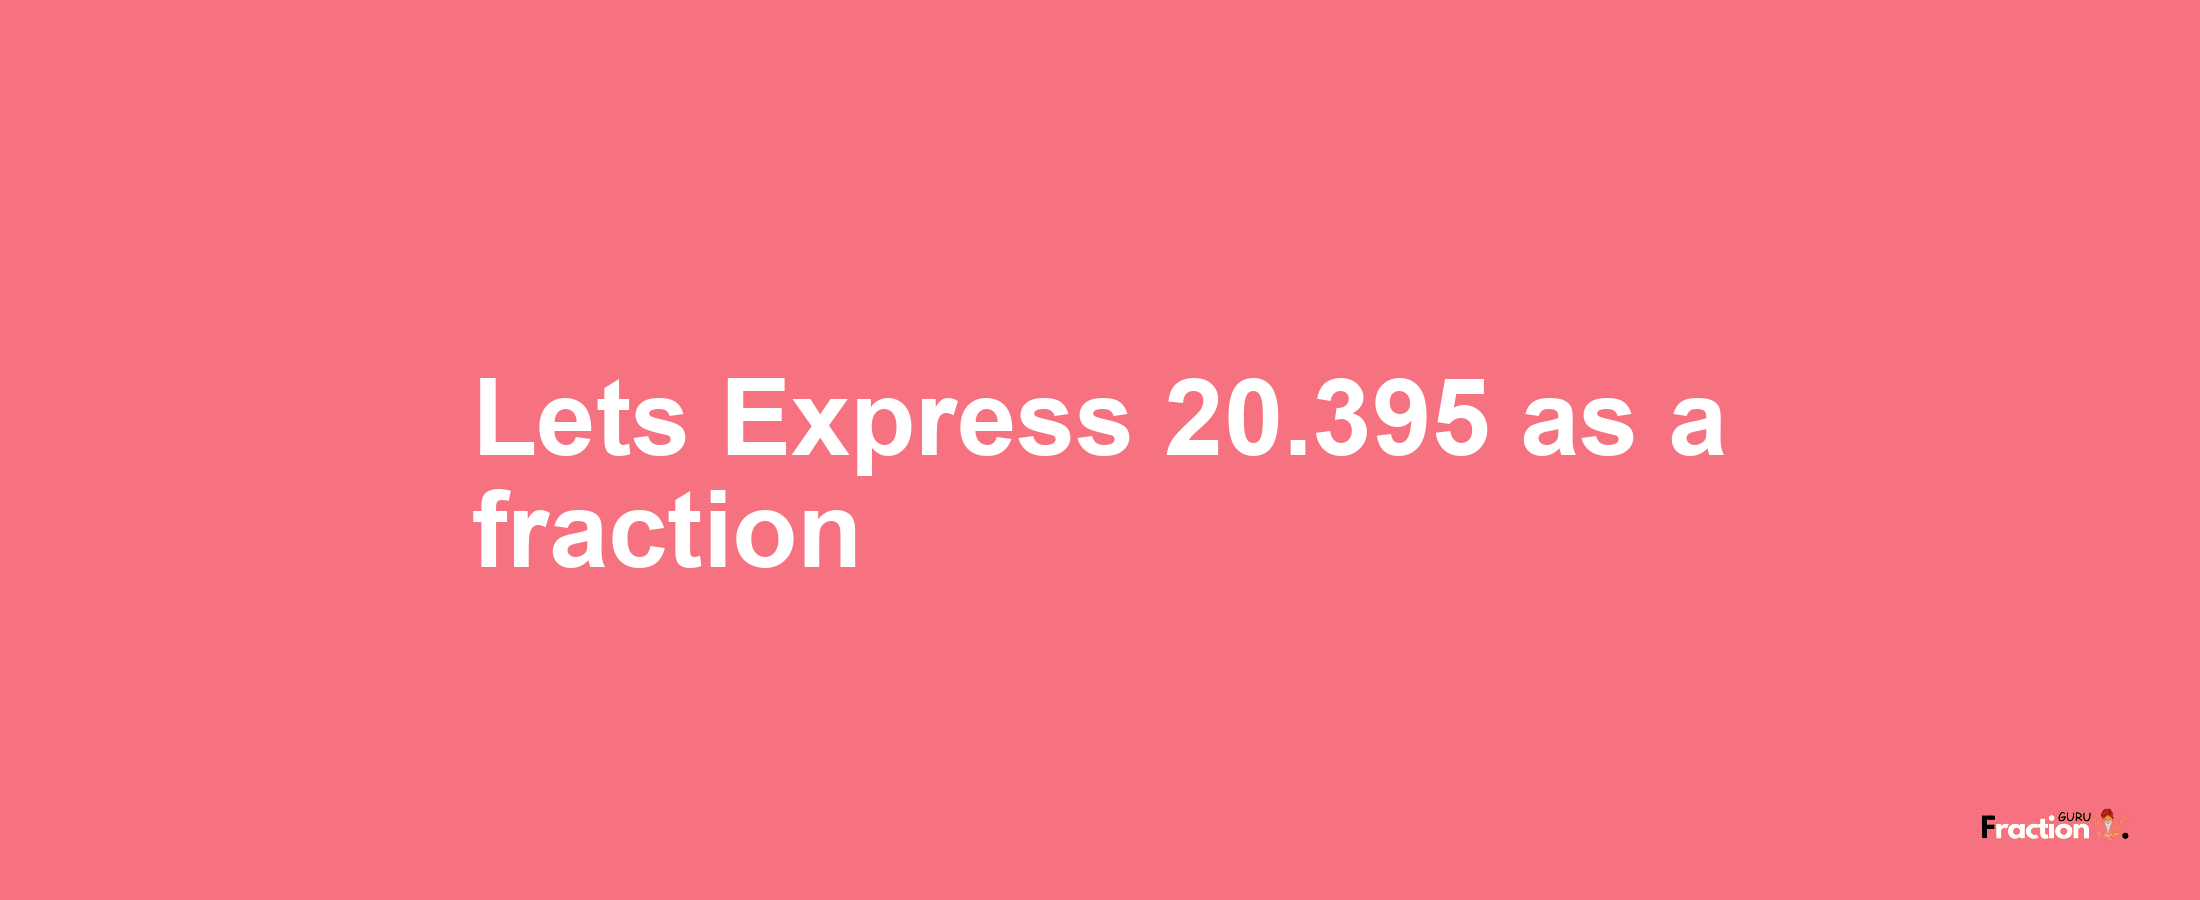 Lets Express 20.395 as afraction